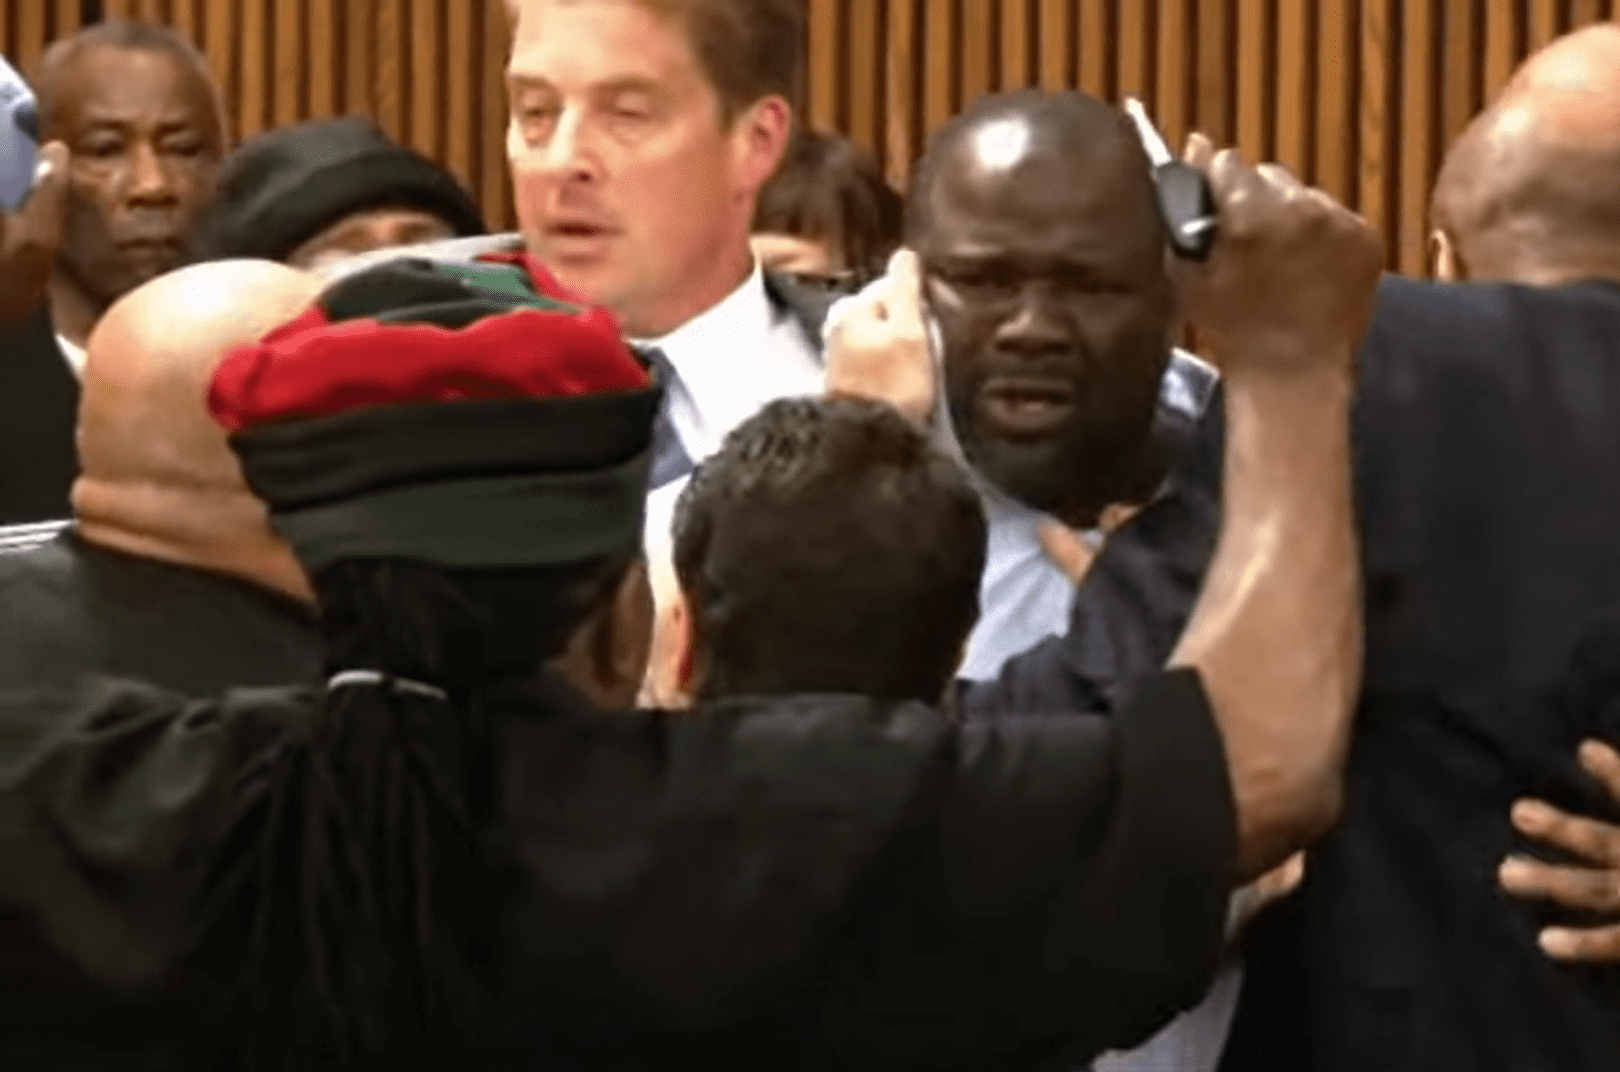 Bailiffs and court officials holding onto Van Terry as he looks confused and anguished.┃ Source: youtube.com/wsj